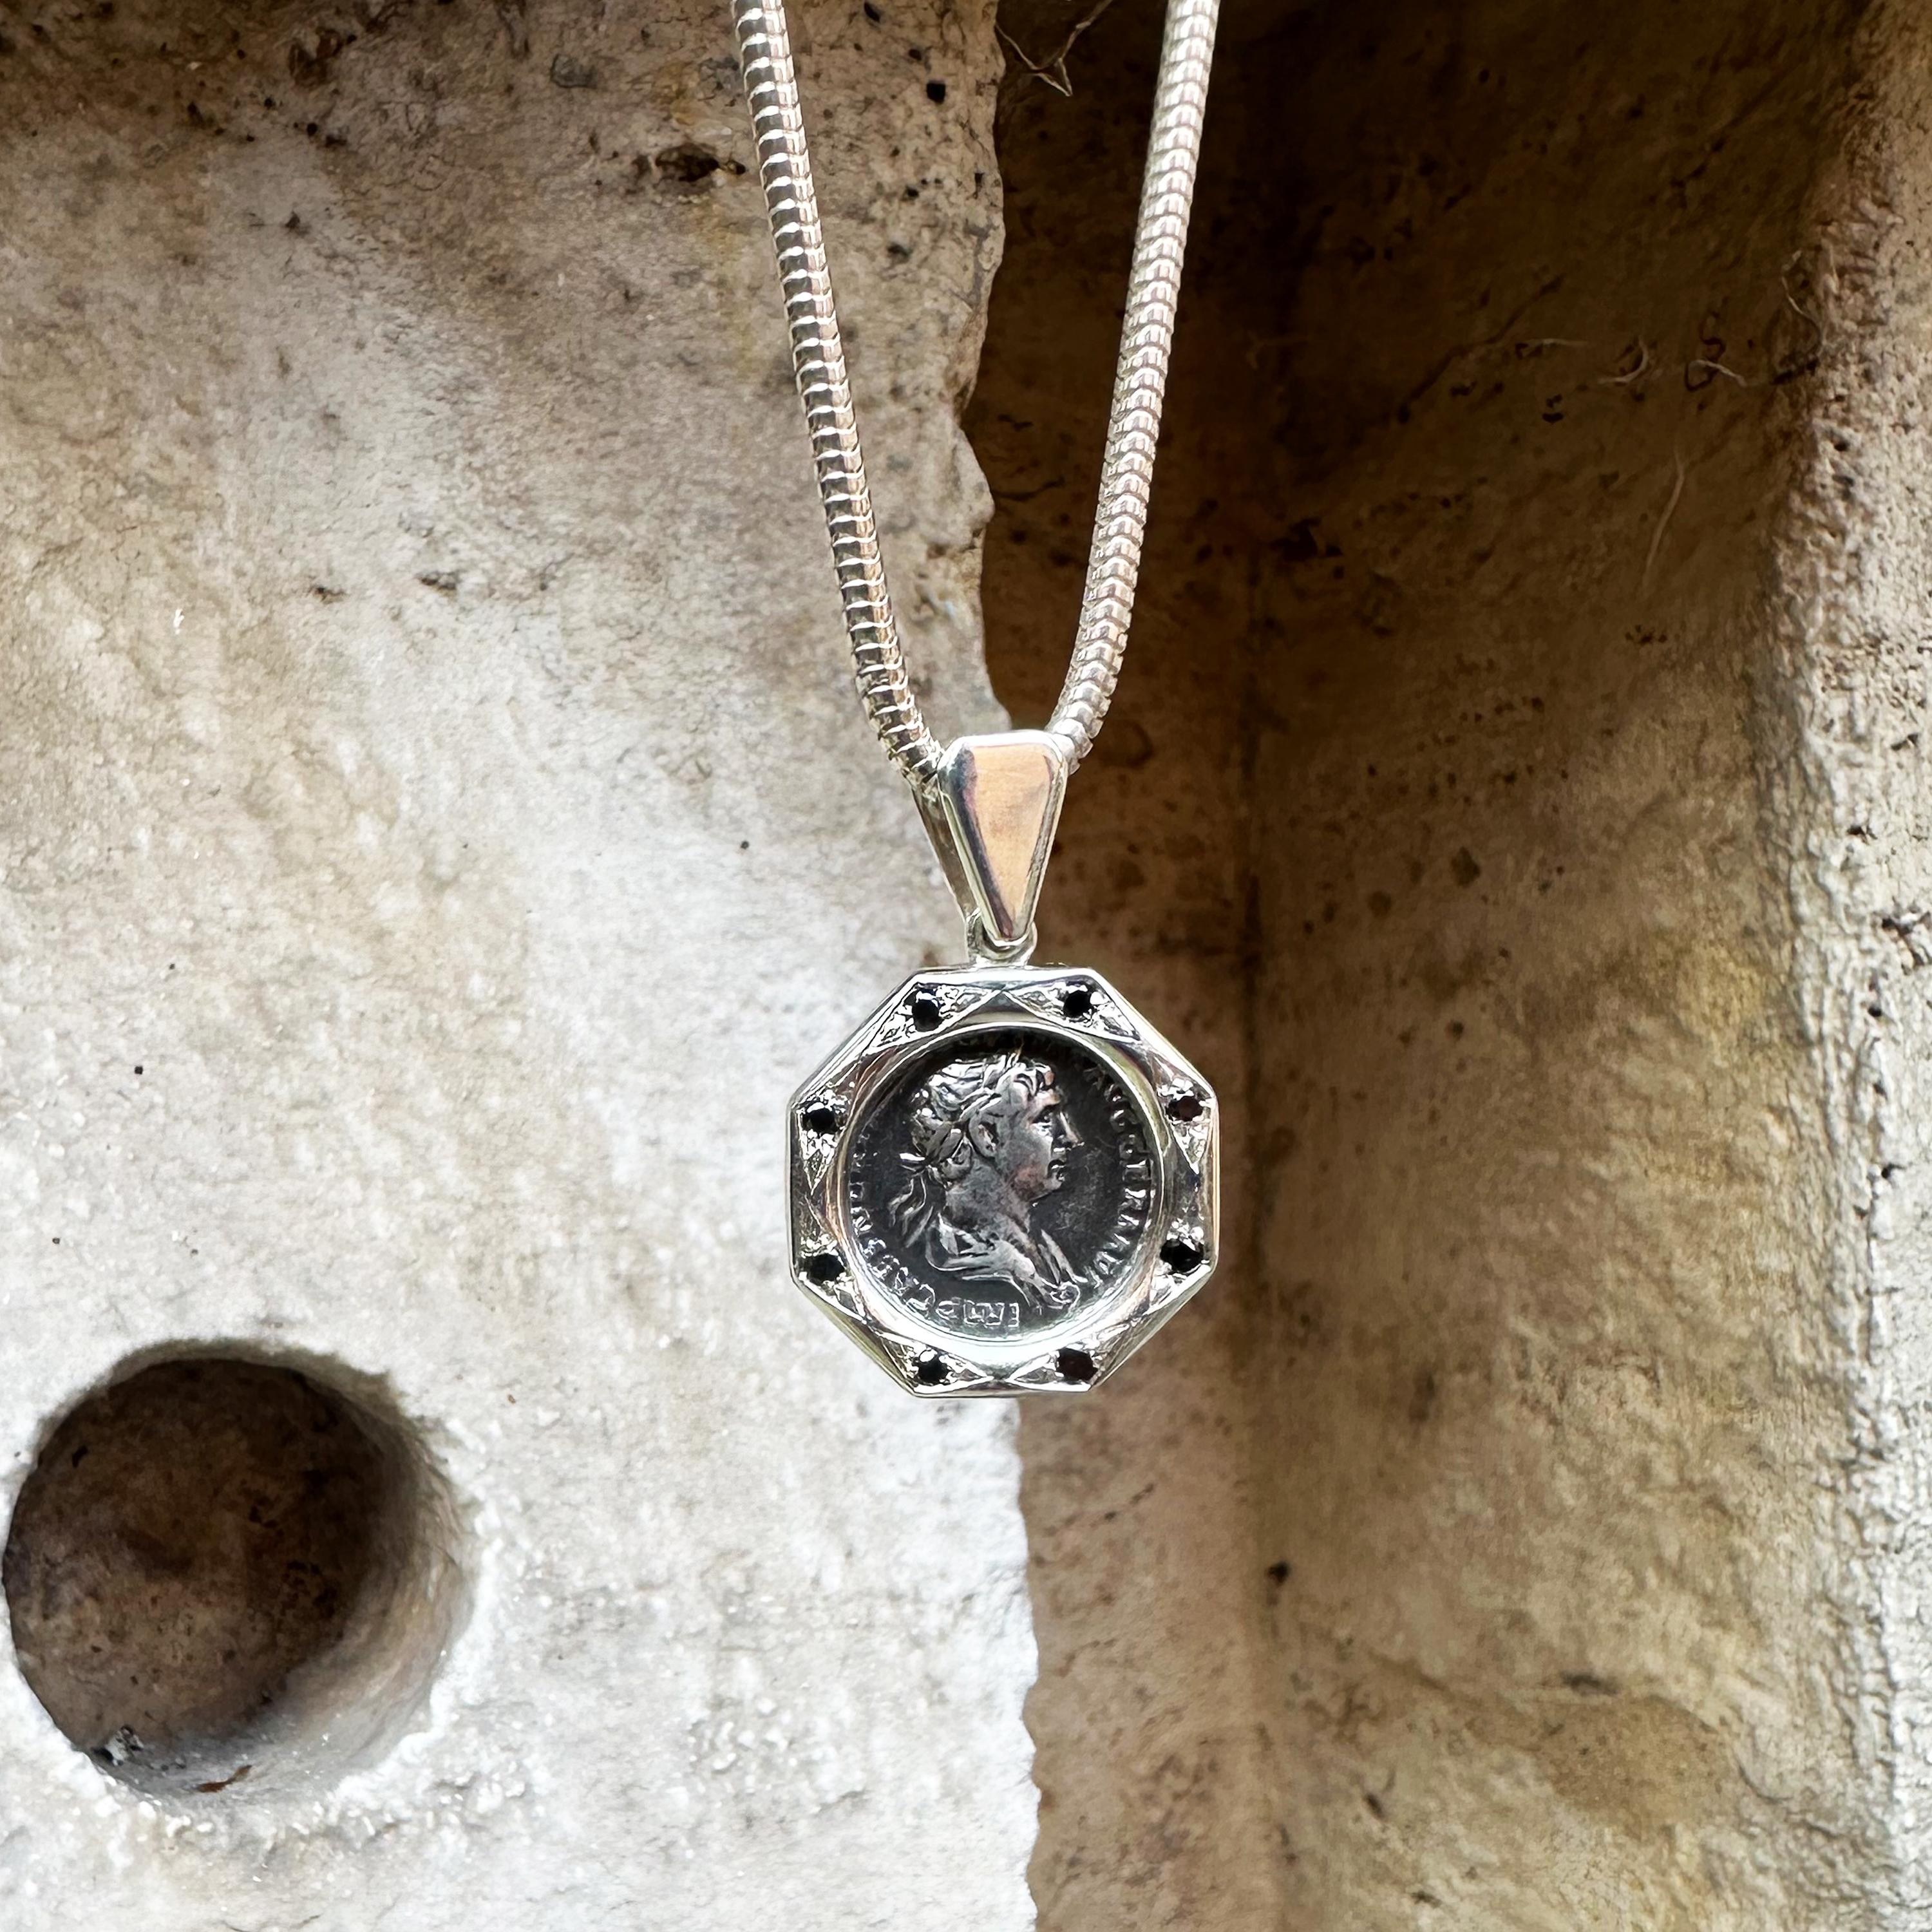 This exquisite silver pendant showcases a genuine Roman silver denarius coin dating back to the 2nd century AD, depicting Emperor Trajan on its front and God Mars on the reverse. Accentuating its allure, the pendant is embellished with 8 black